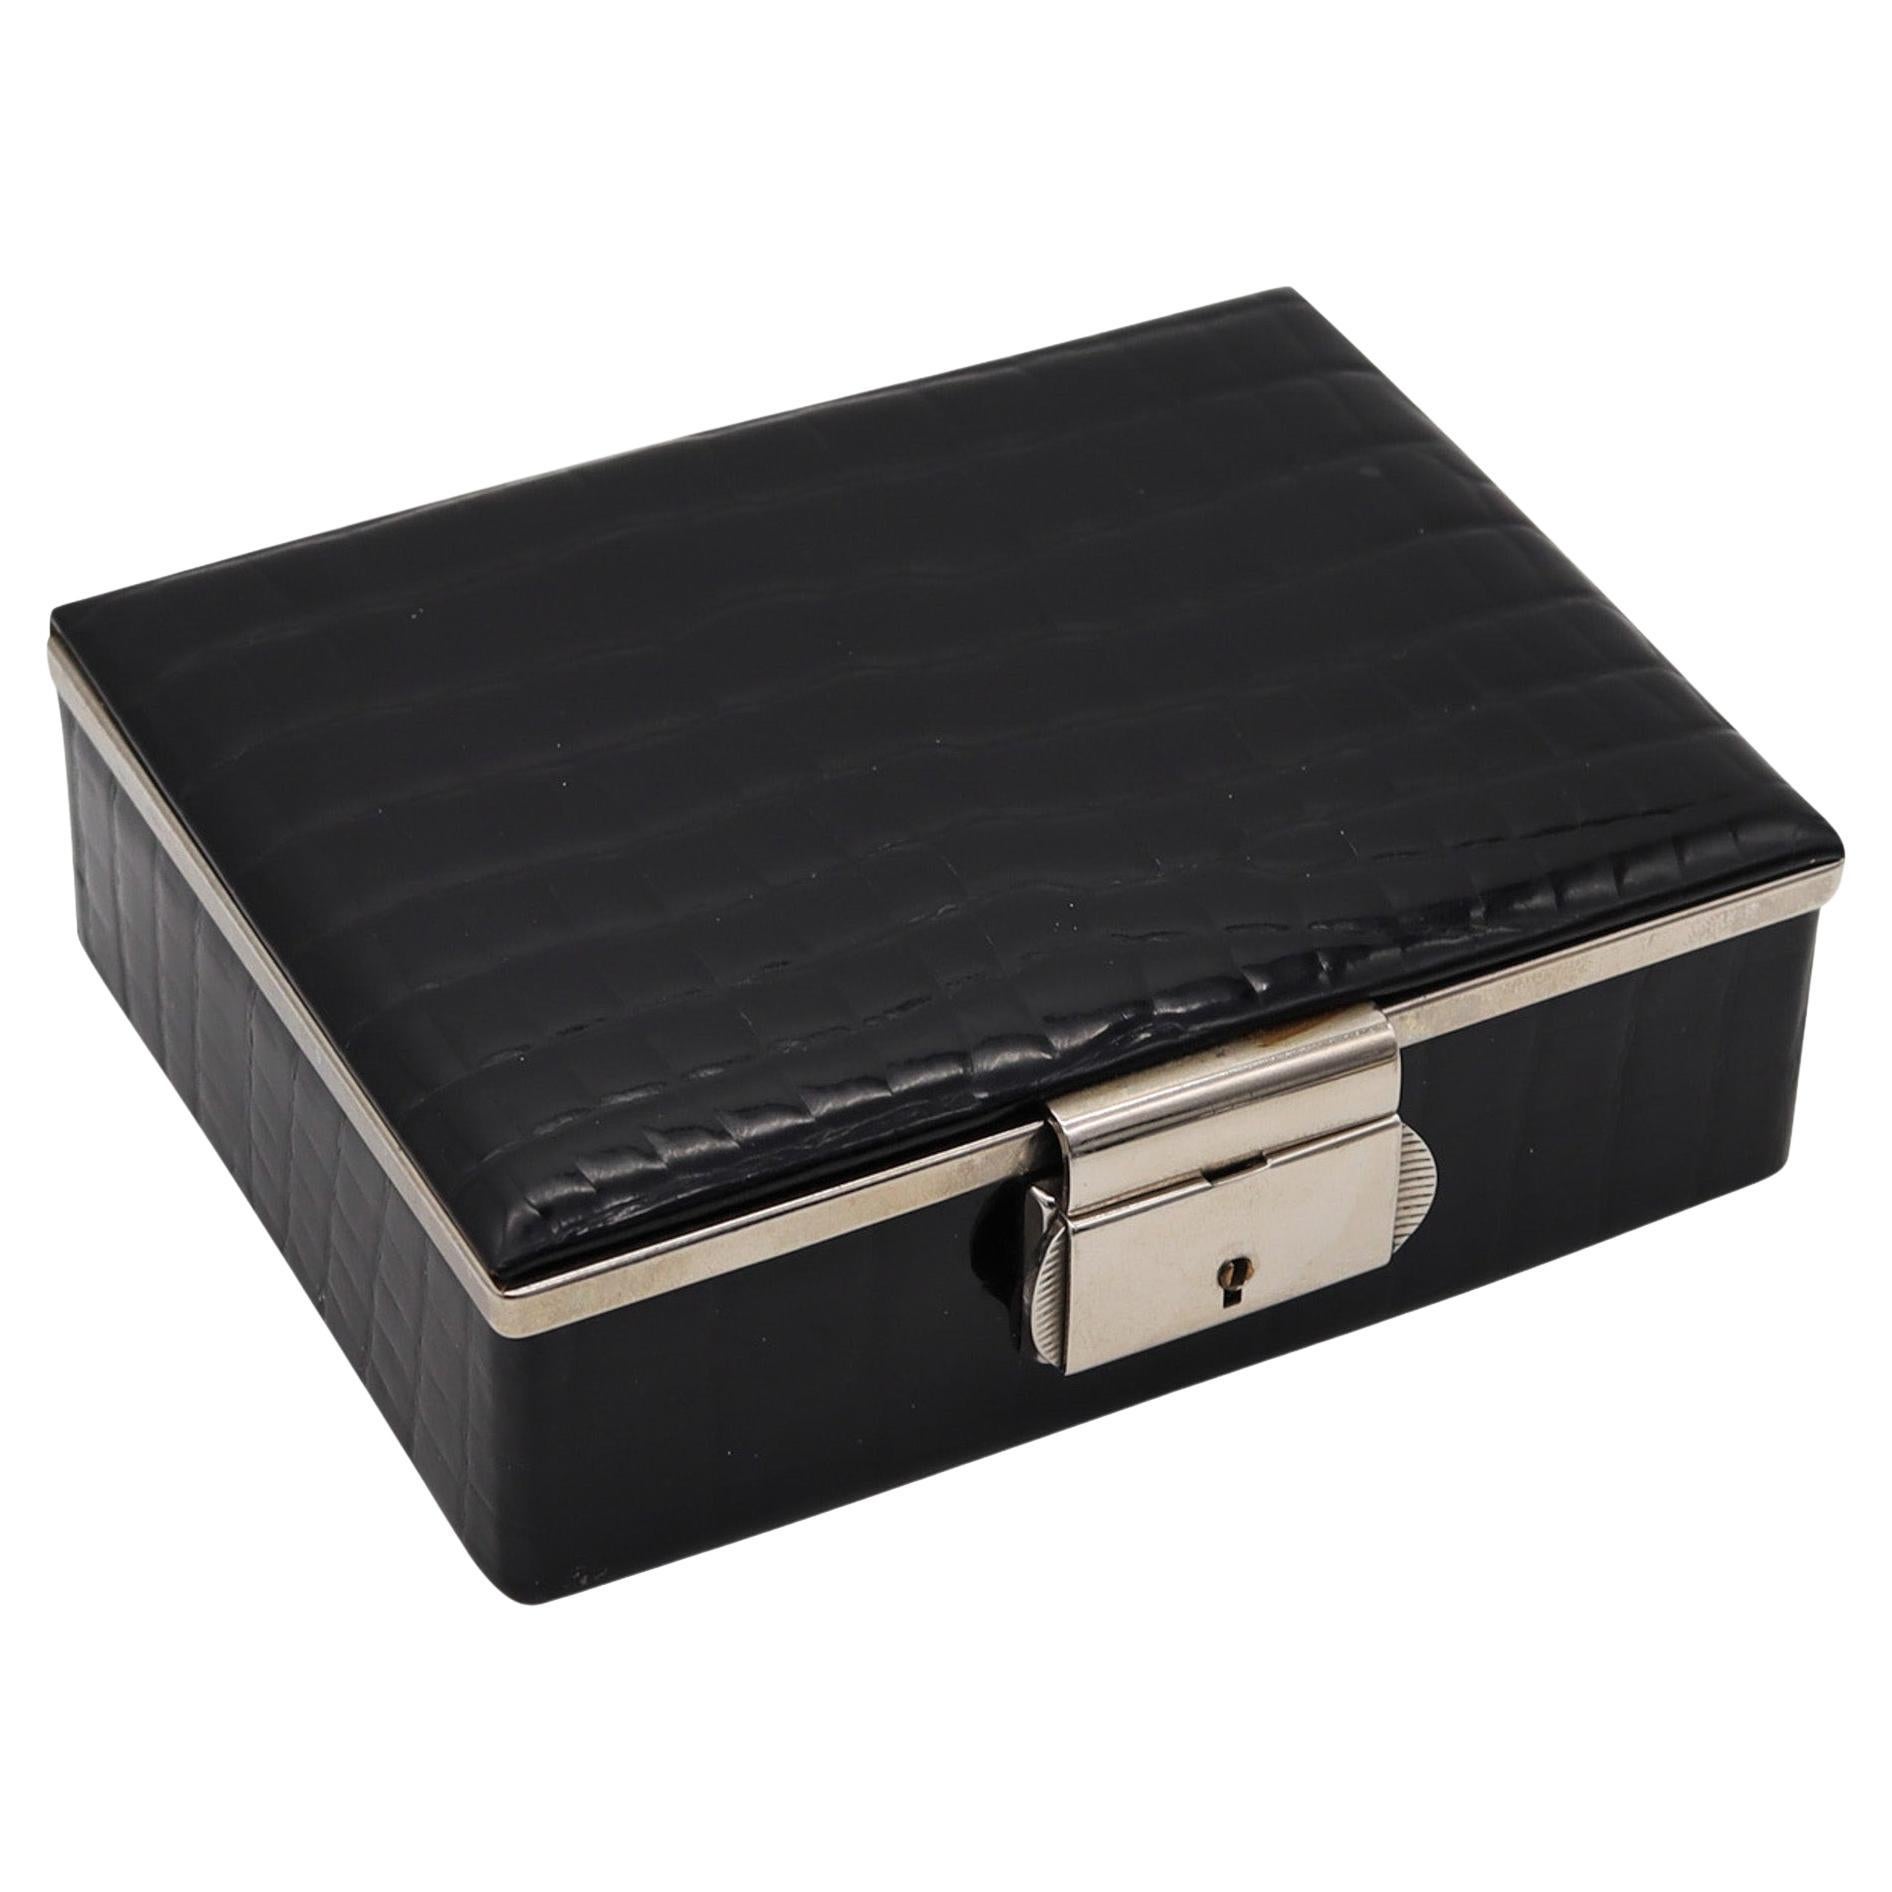 Alfred Dunhill Germany 1990 Decorative Desk Box In Black Leather & Chromed Steel For Sale